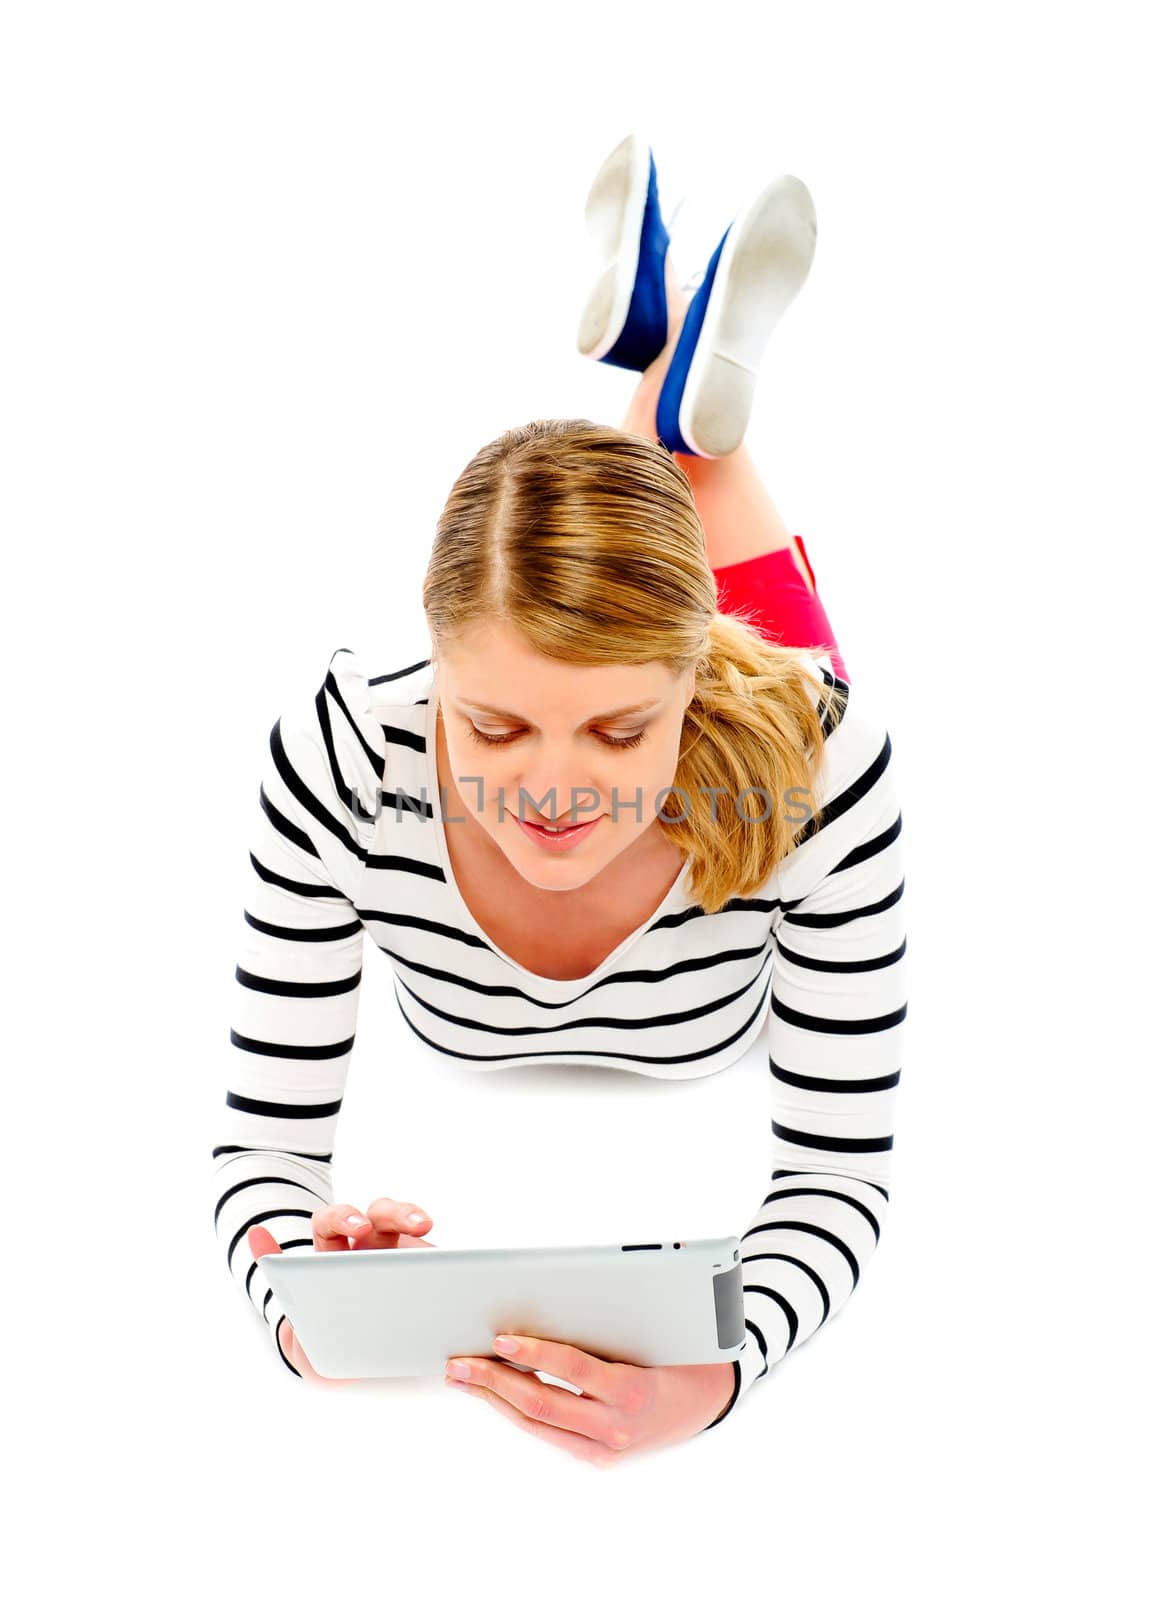 Woman using tablet computer. Lying on floor, white background